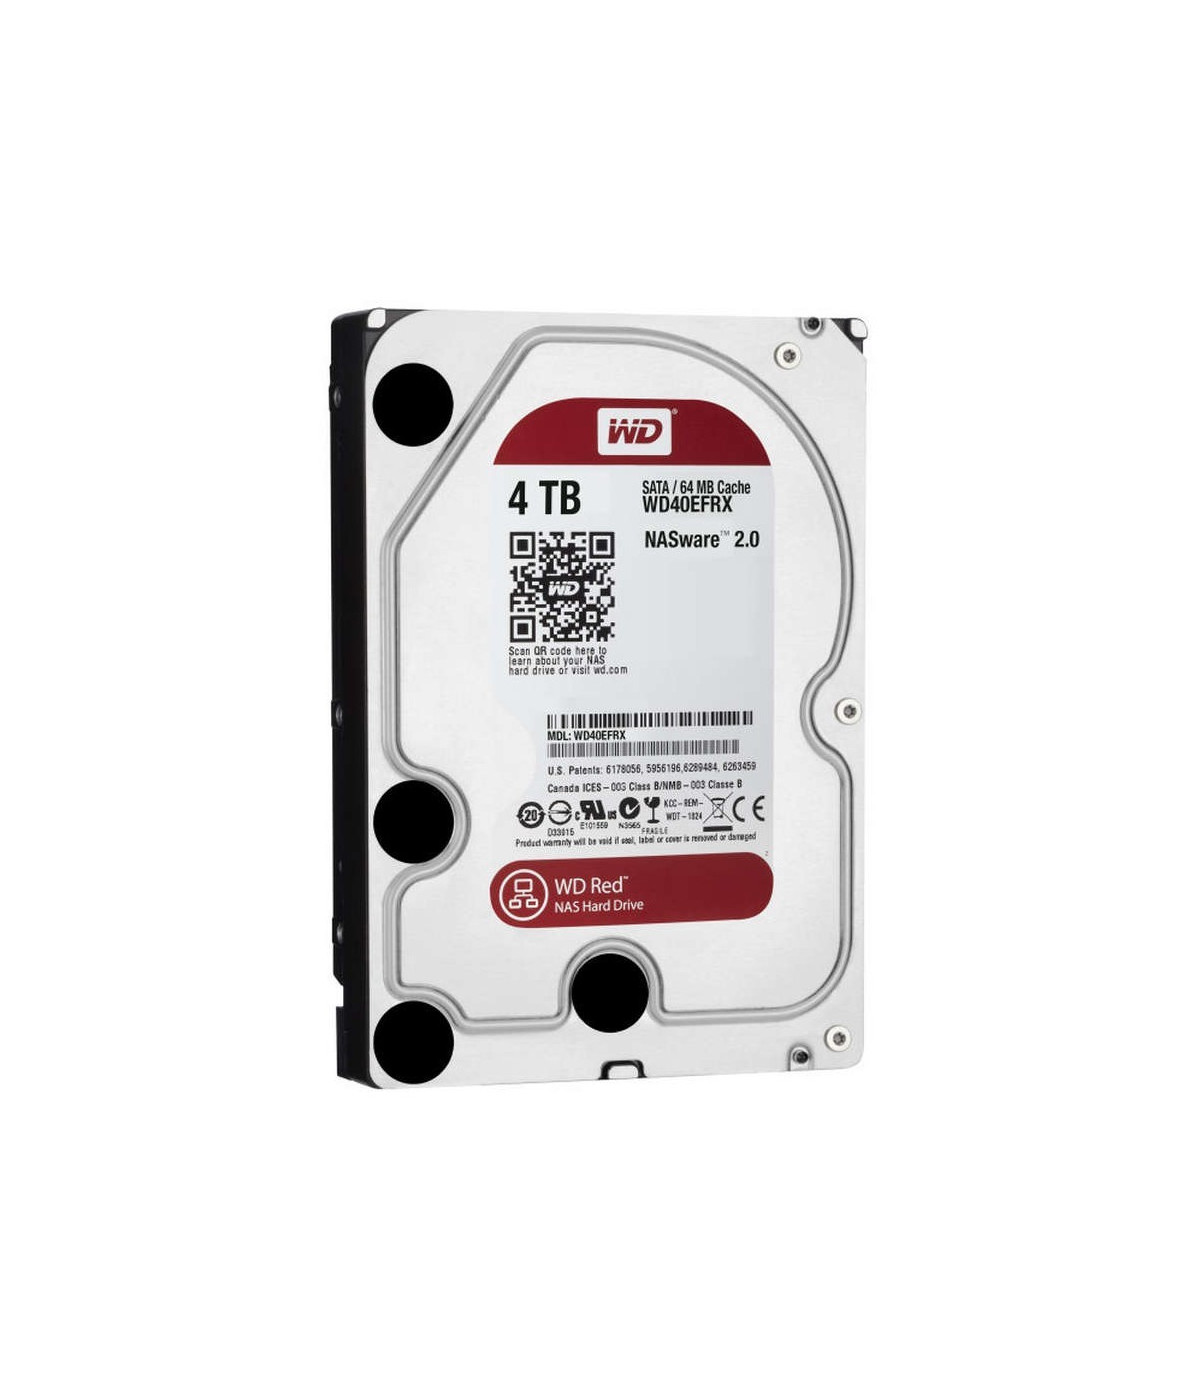 DISCO DURO WESTER DIGITAL WD 4TB RED (WD40EFRX)